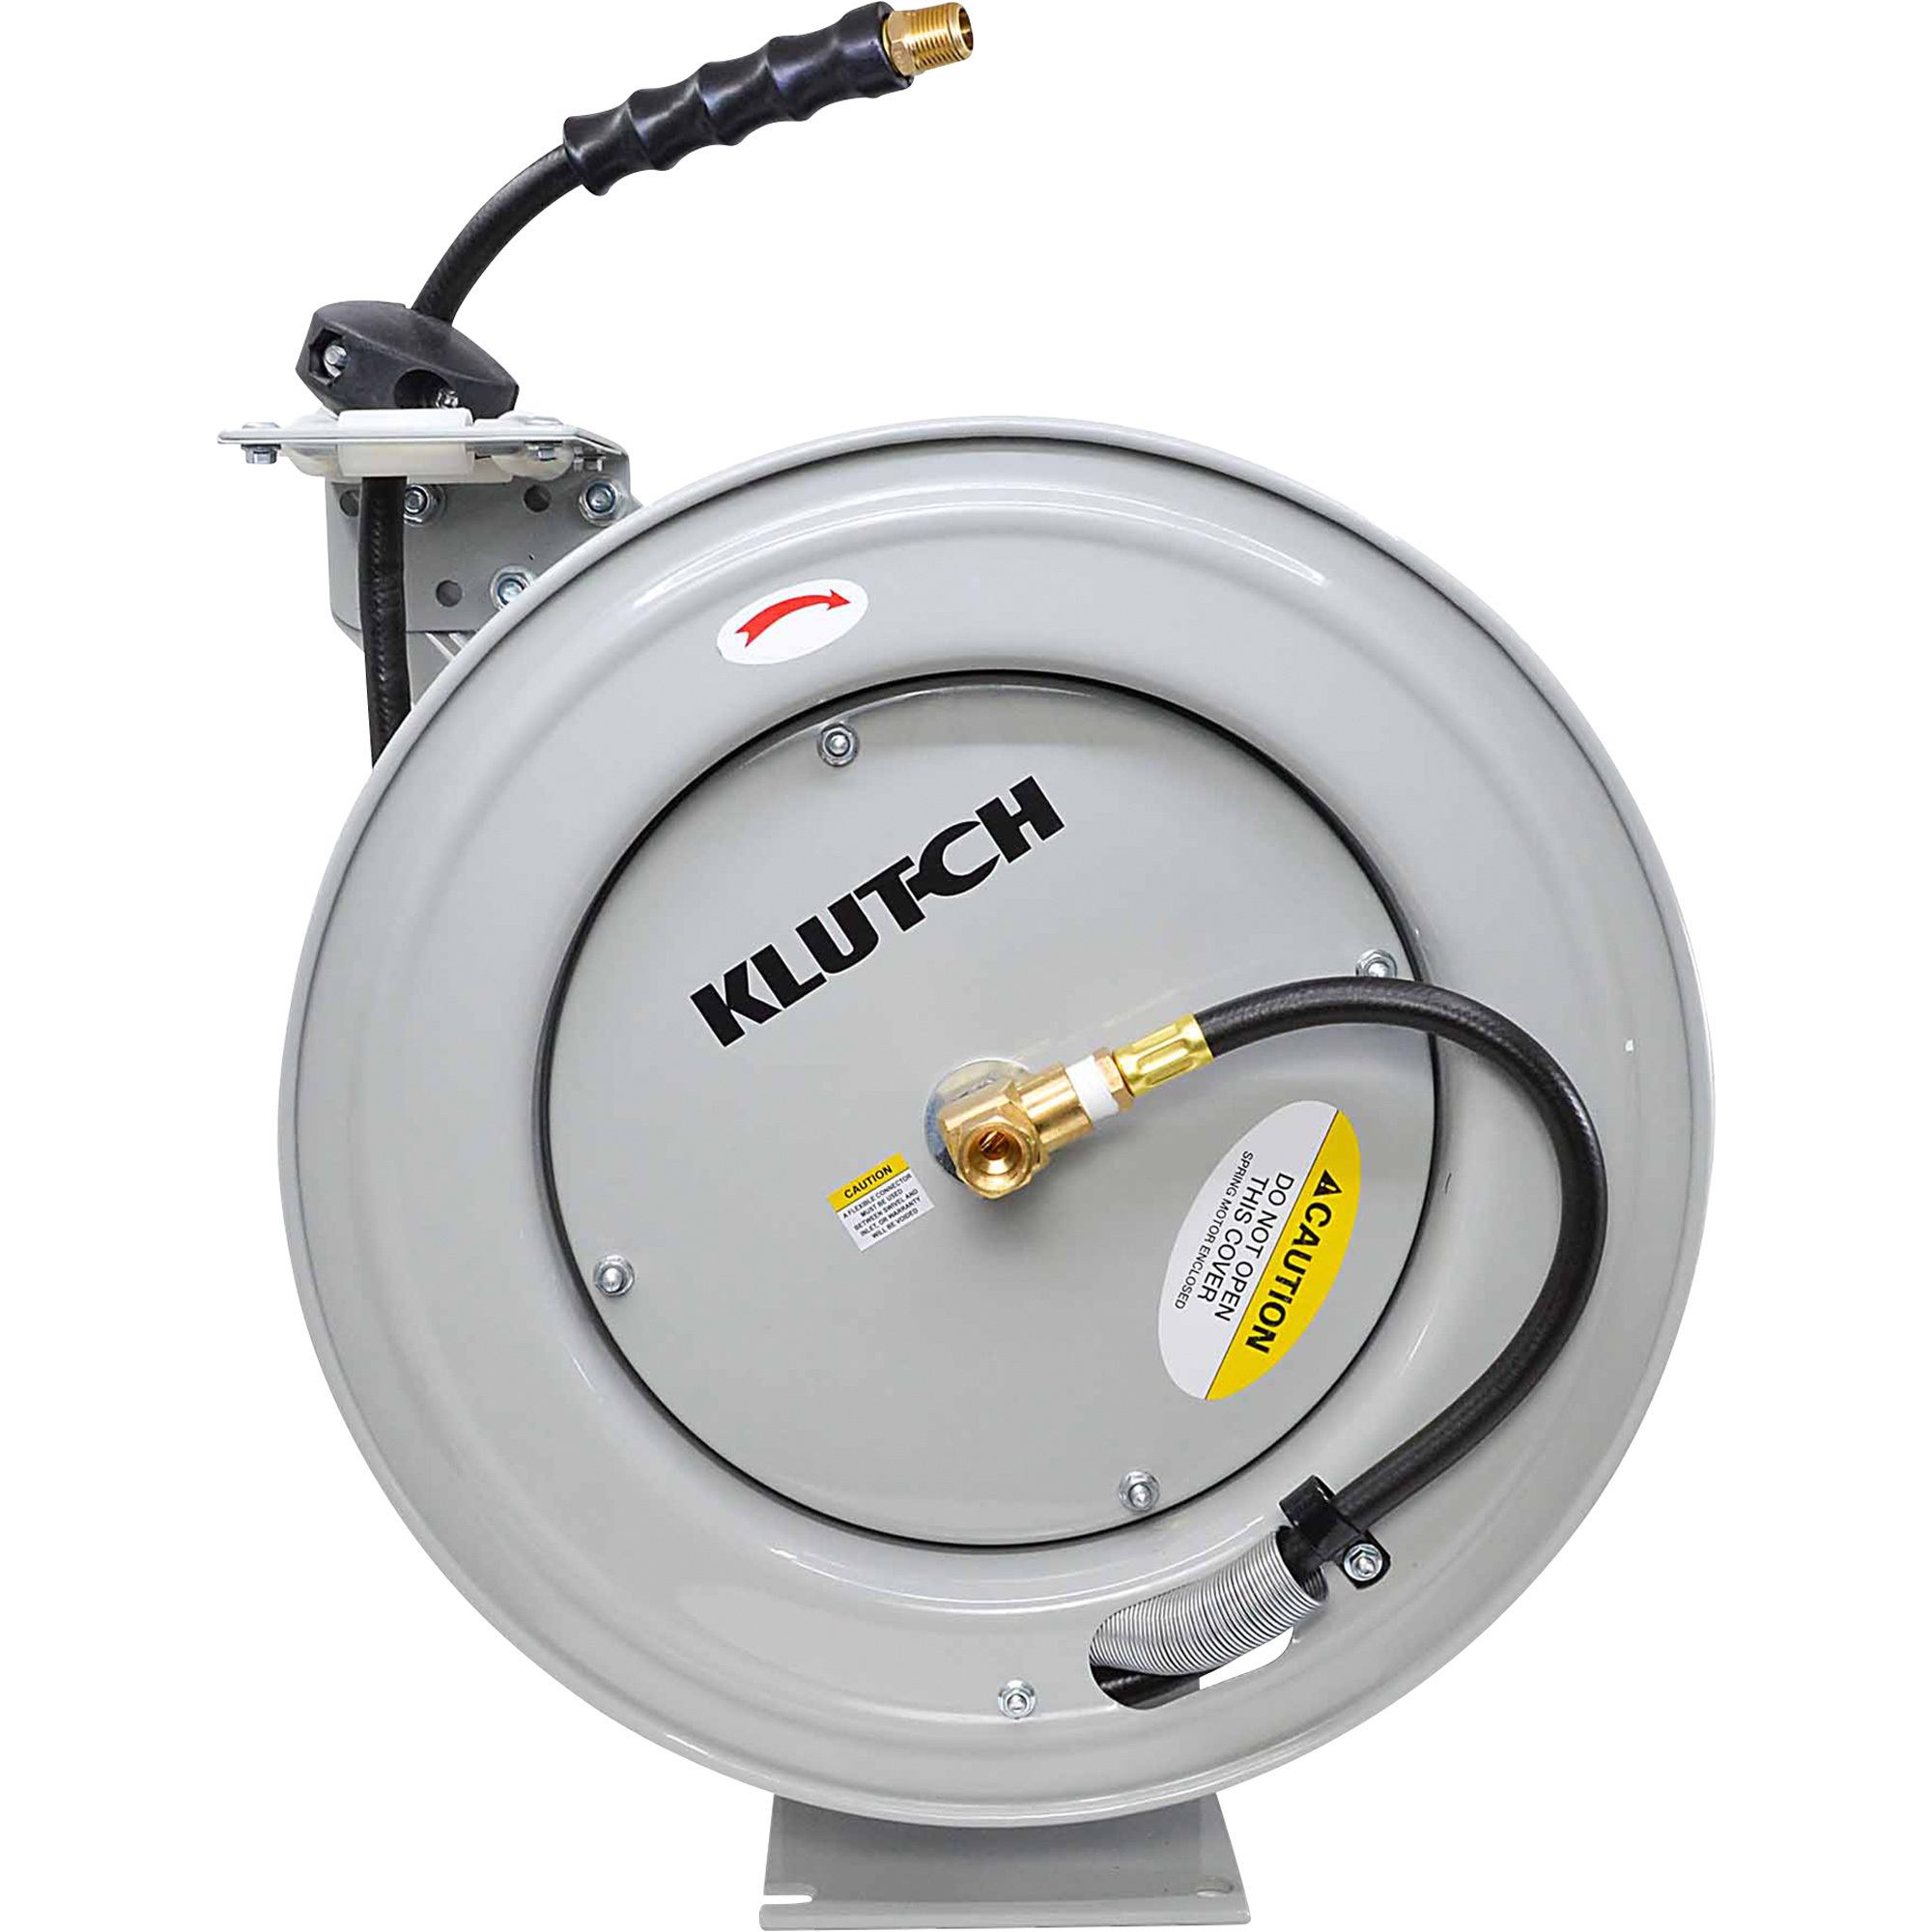 Klutch Auto-Rewind Air Hose Reel, with 3/8in. x 25ft. Hose, 300 PSI